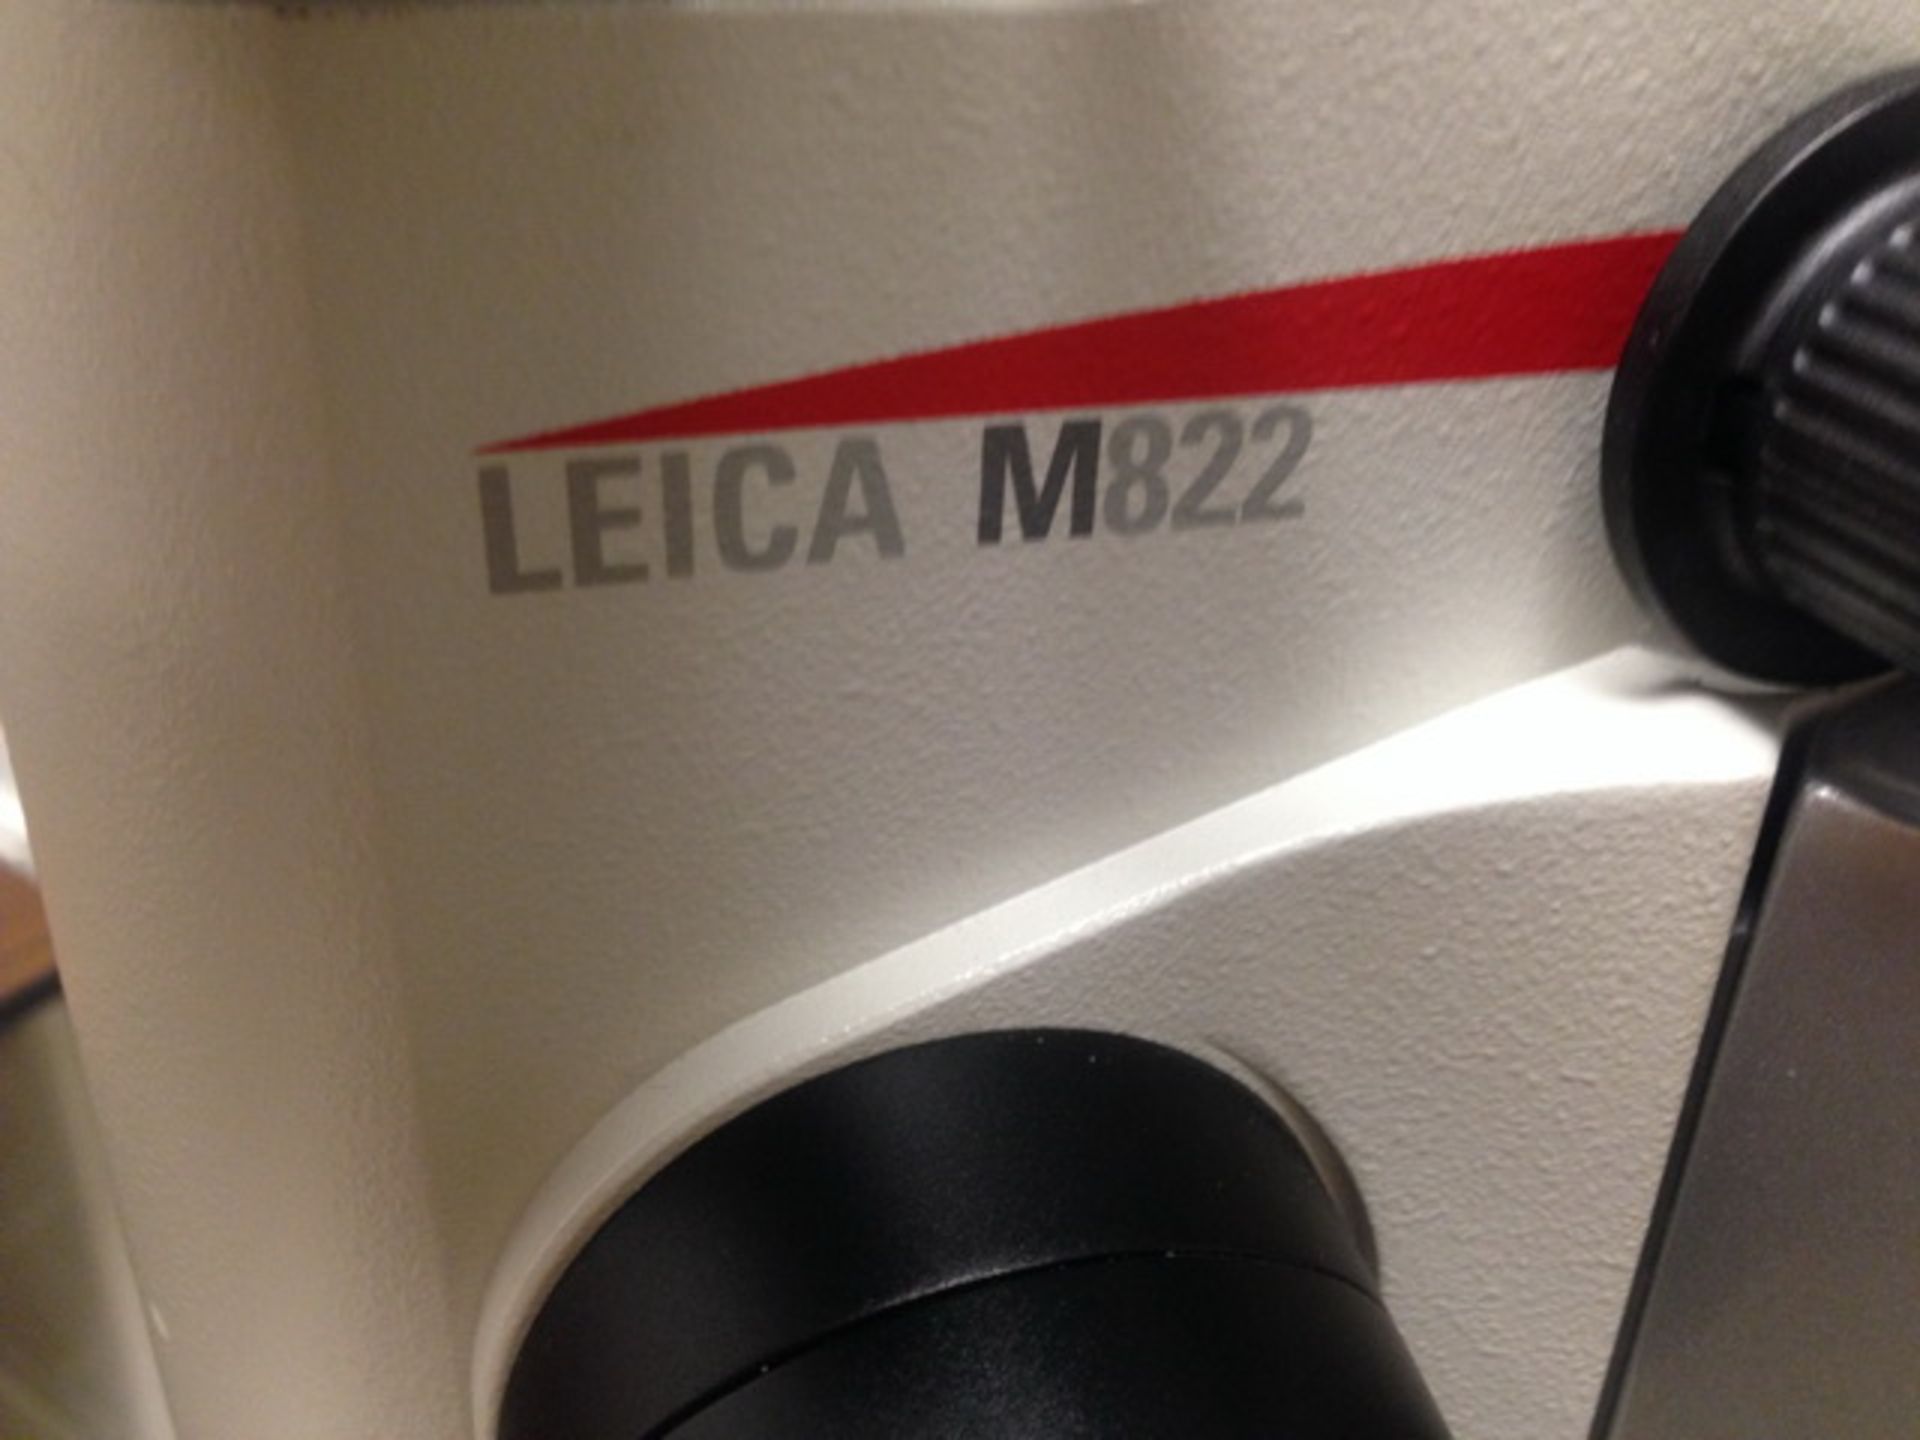 Leica M822/M844 F40 Ophthalmic Surgical Microscope On Floor Stand s/n-020306003 [Currently - Image 6 of 13